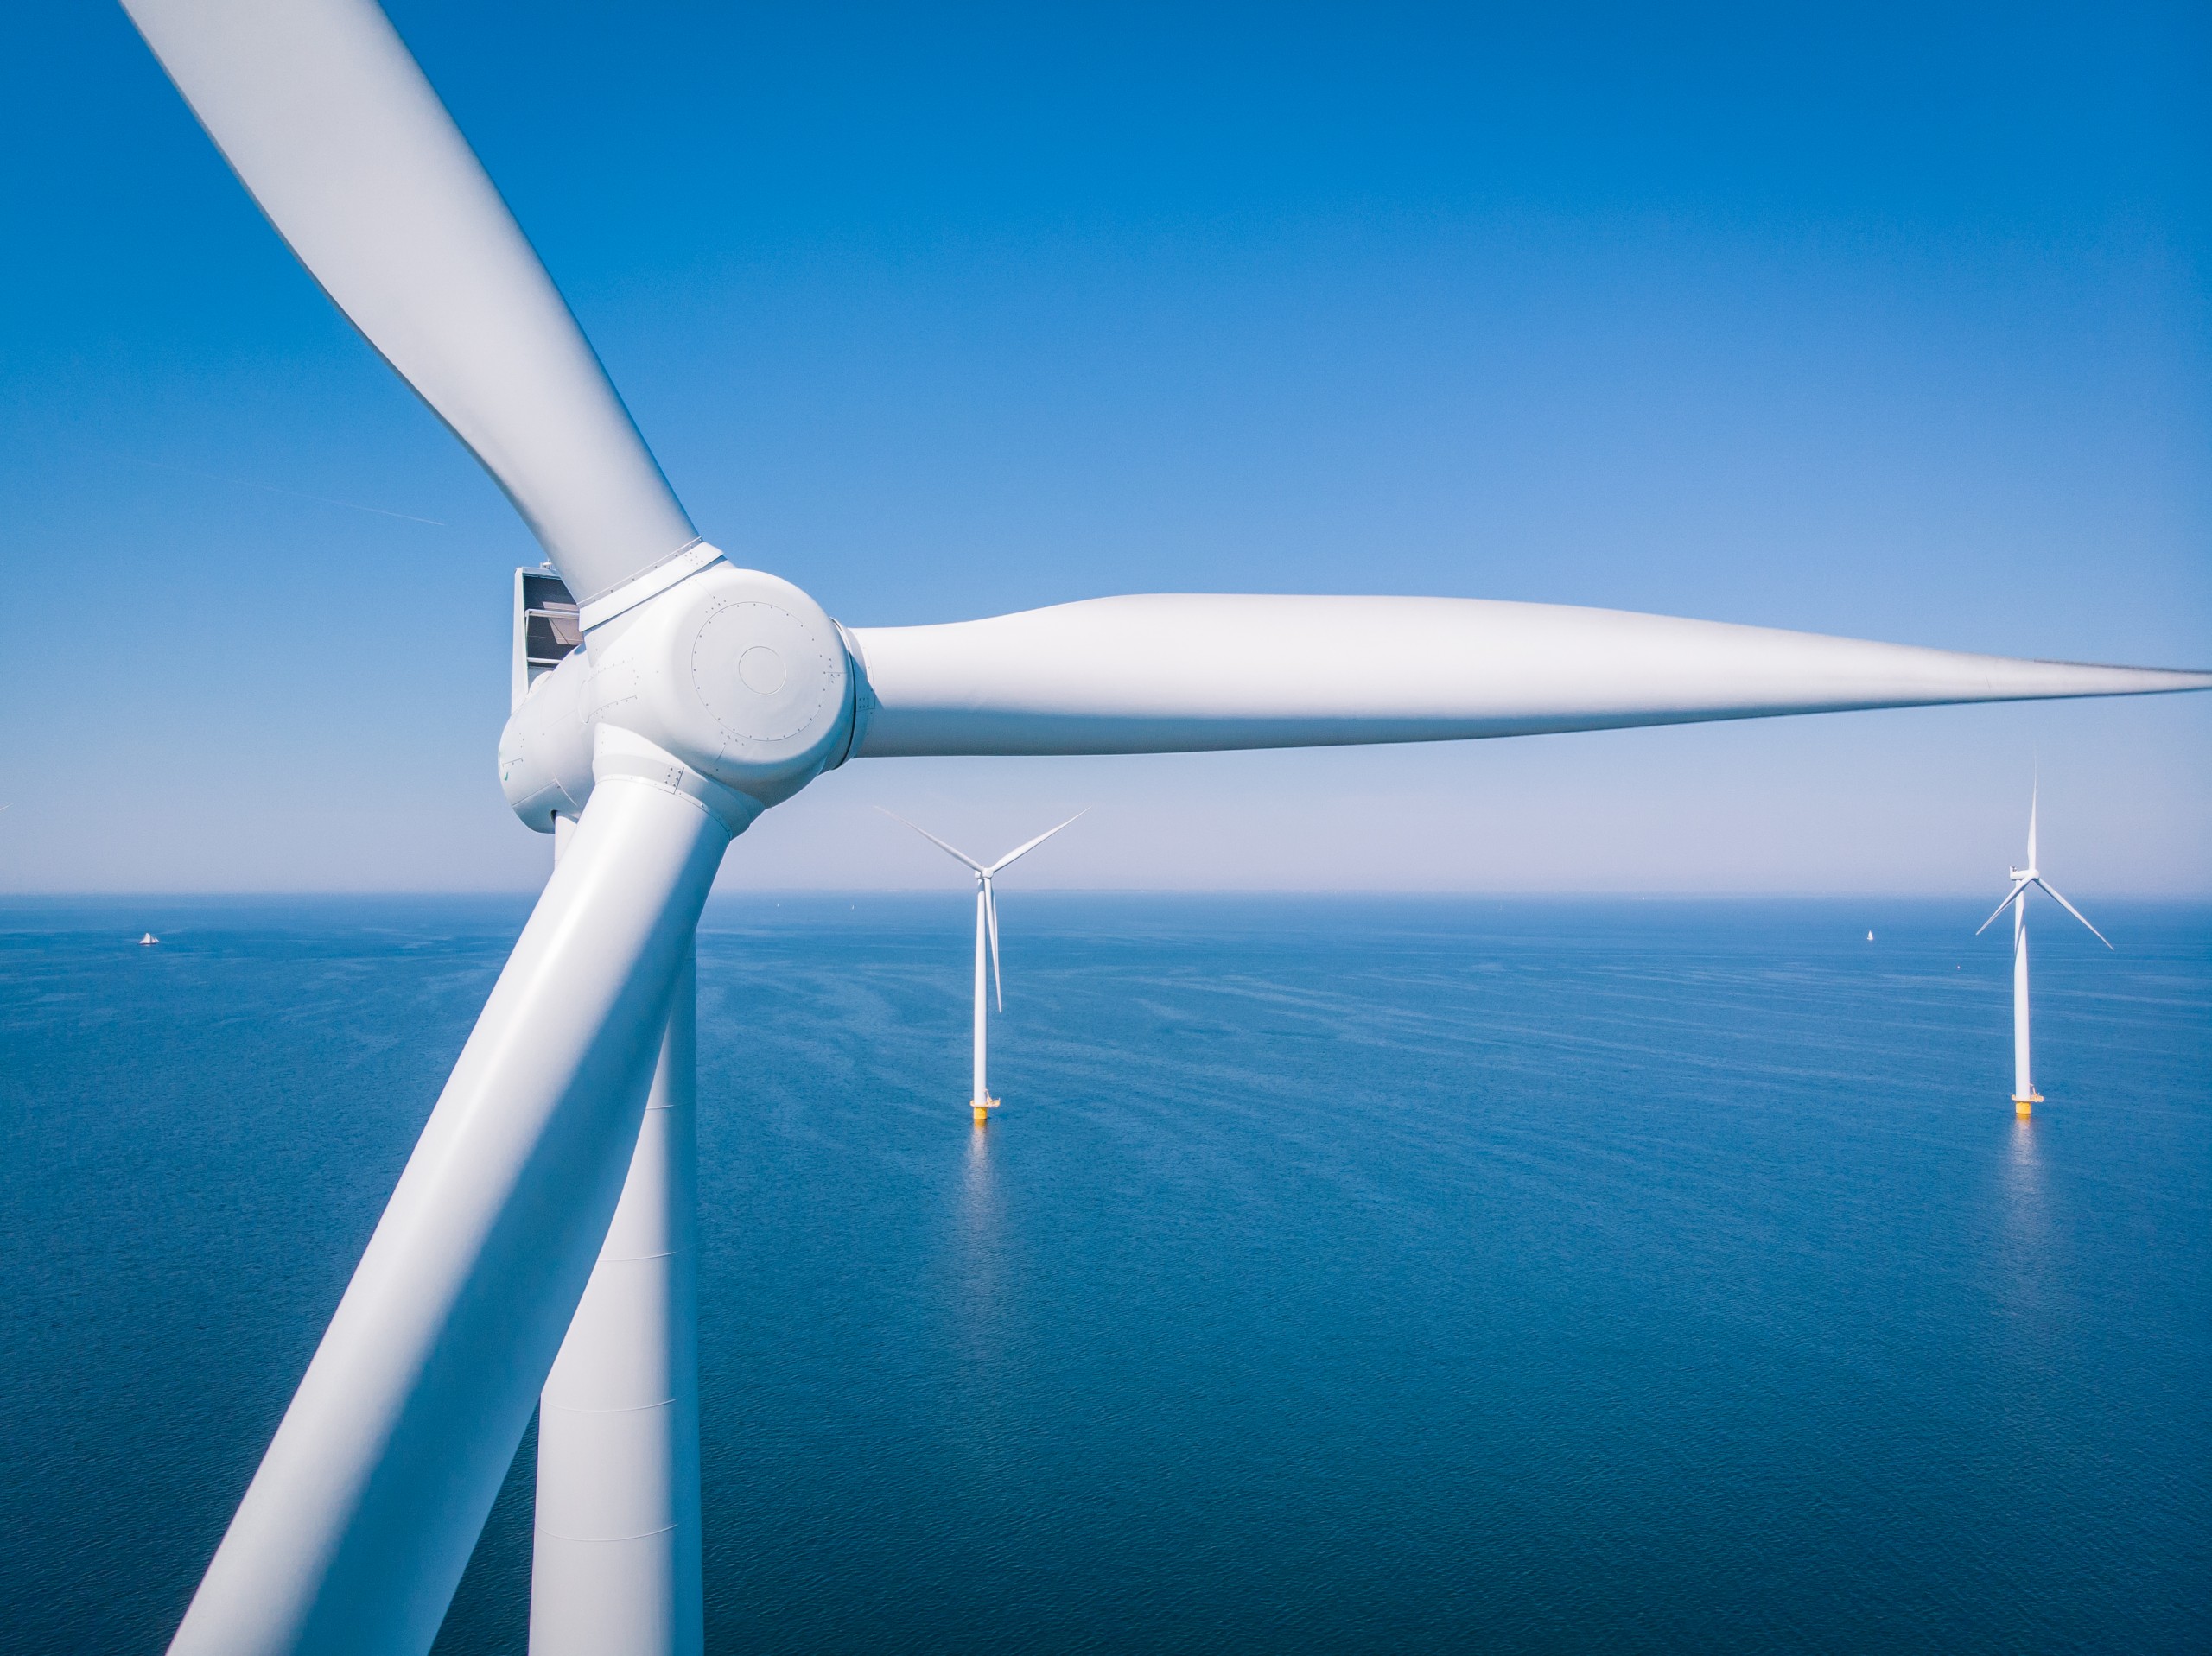 OWC completes wind condition review for future German offshore wind tendering sites